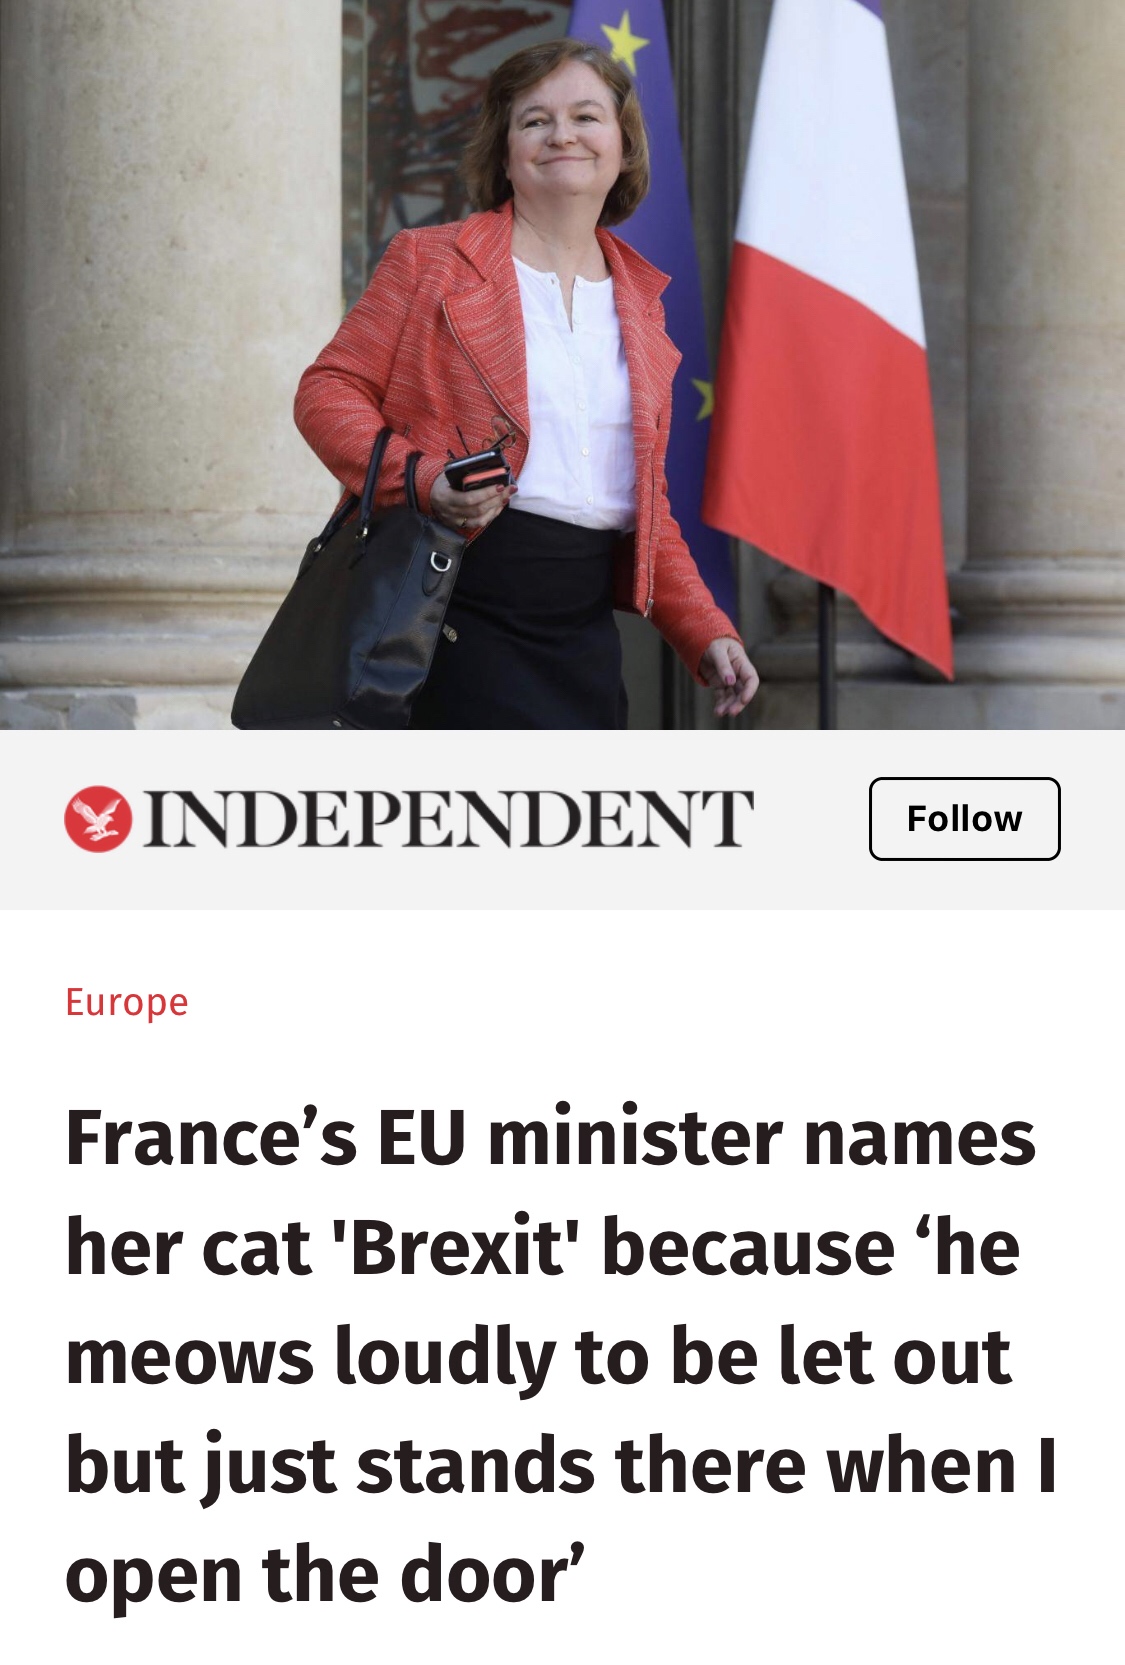 France can burn with the rest of them.